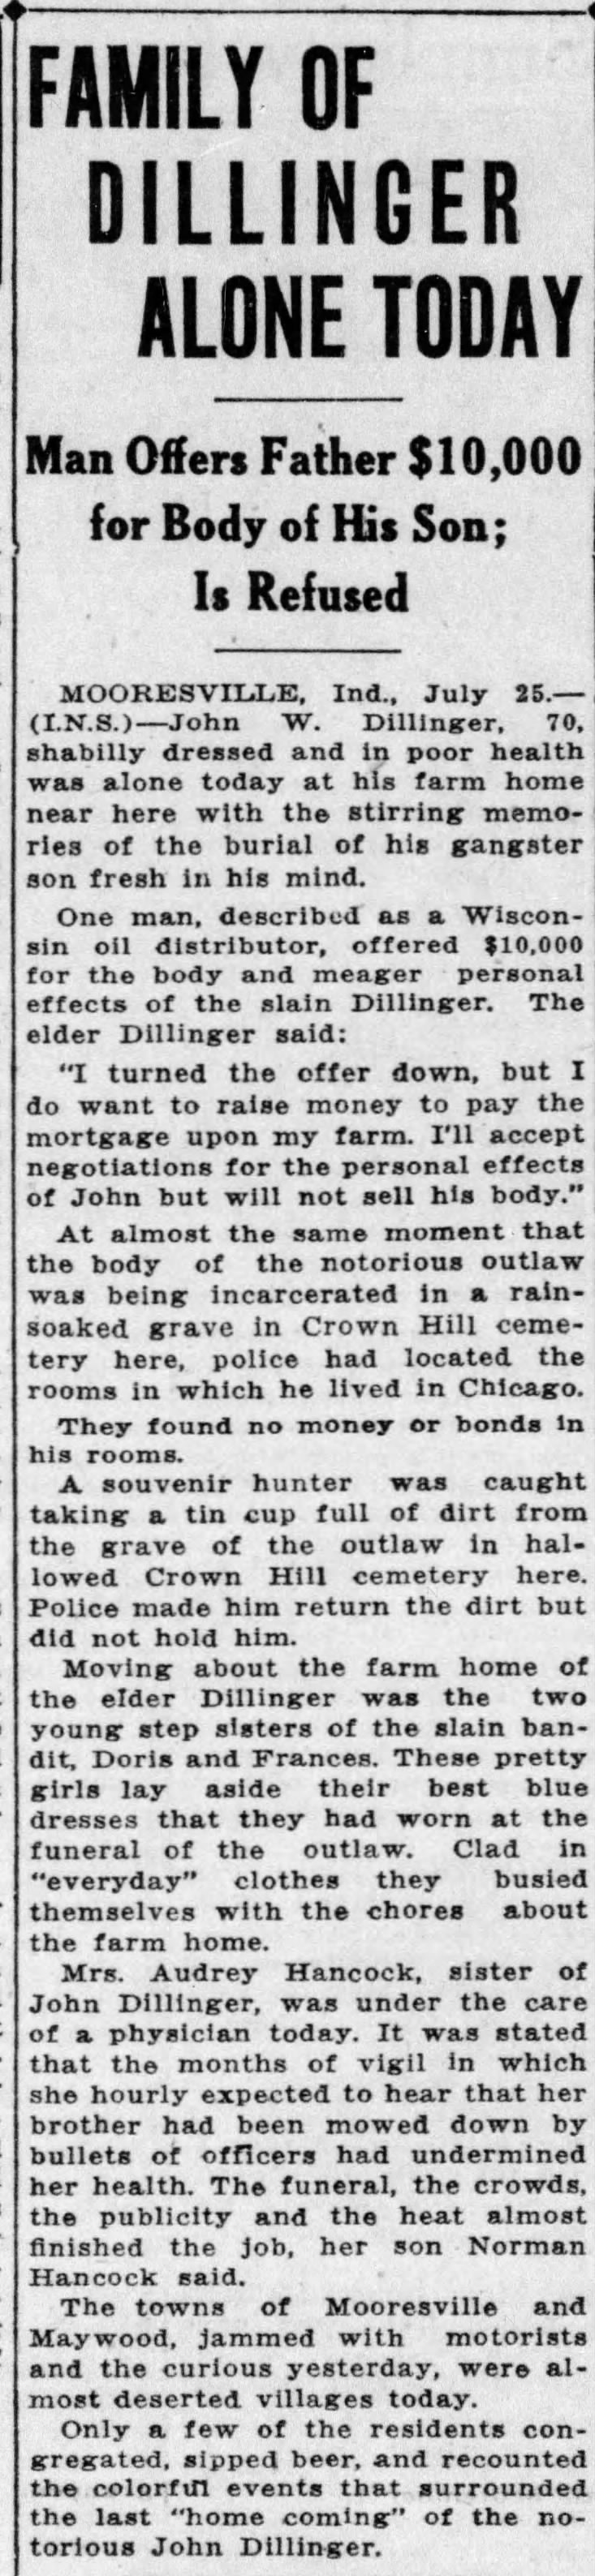 Family of Dillinger Alone Today